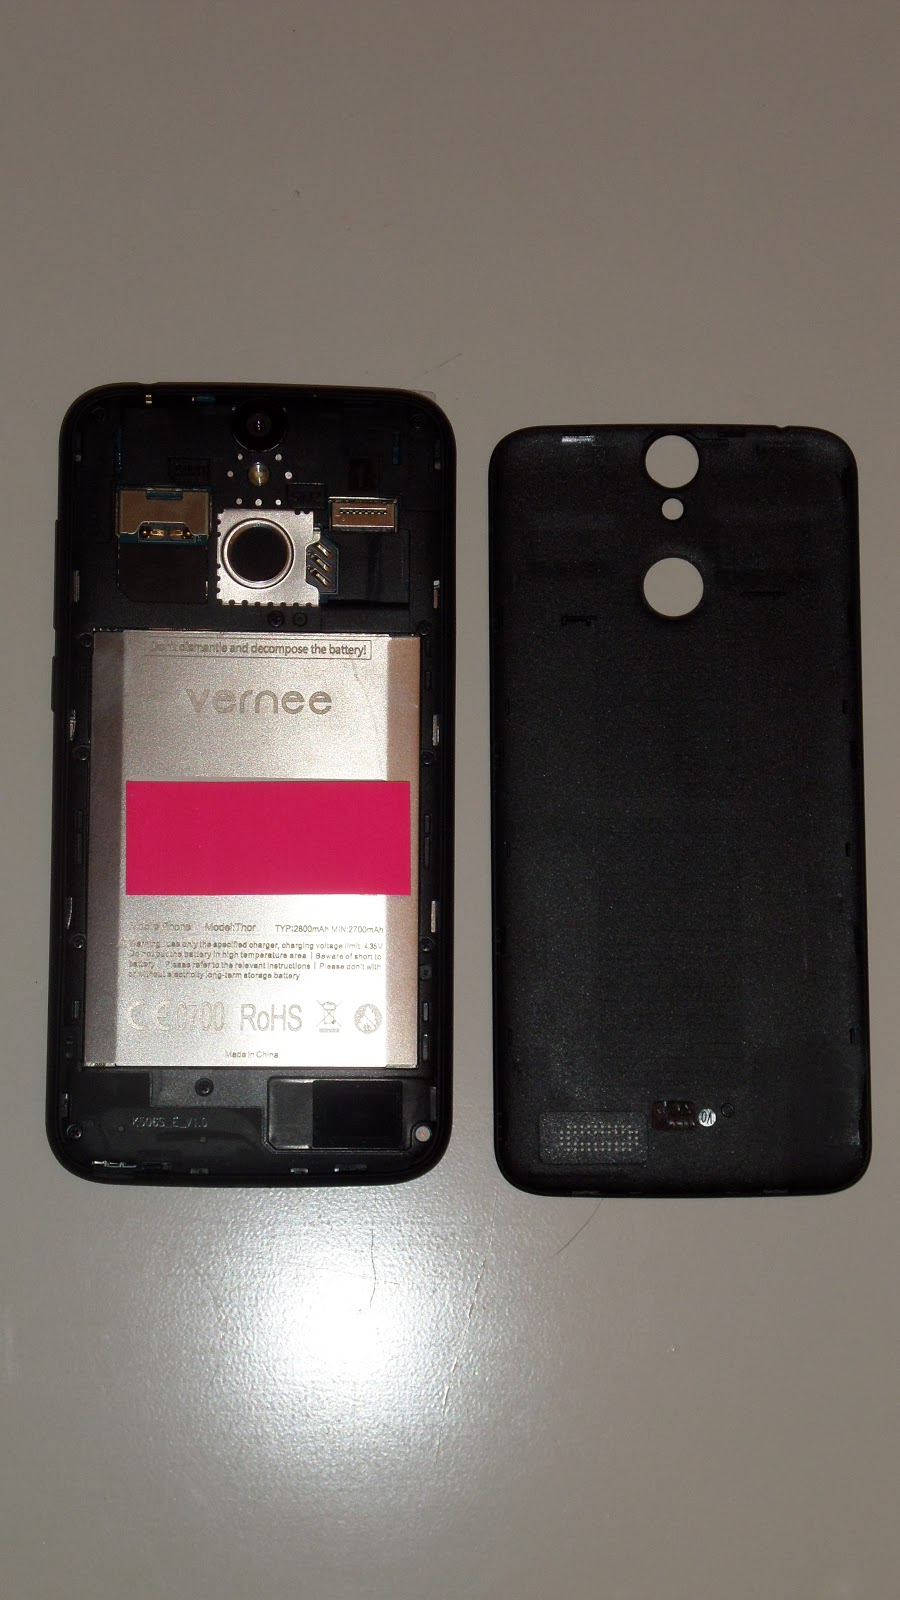 [REVIEW] Vernee Thor (Smartphone)